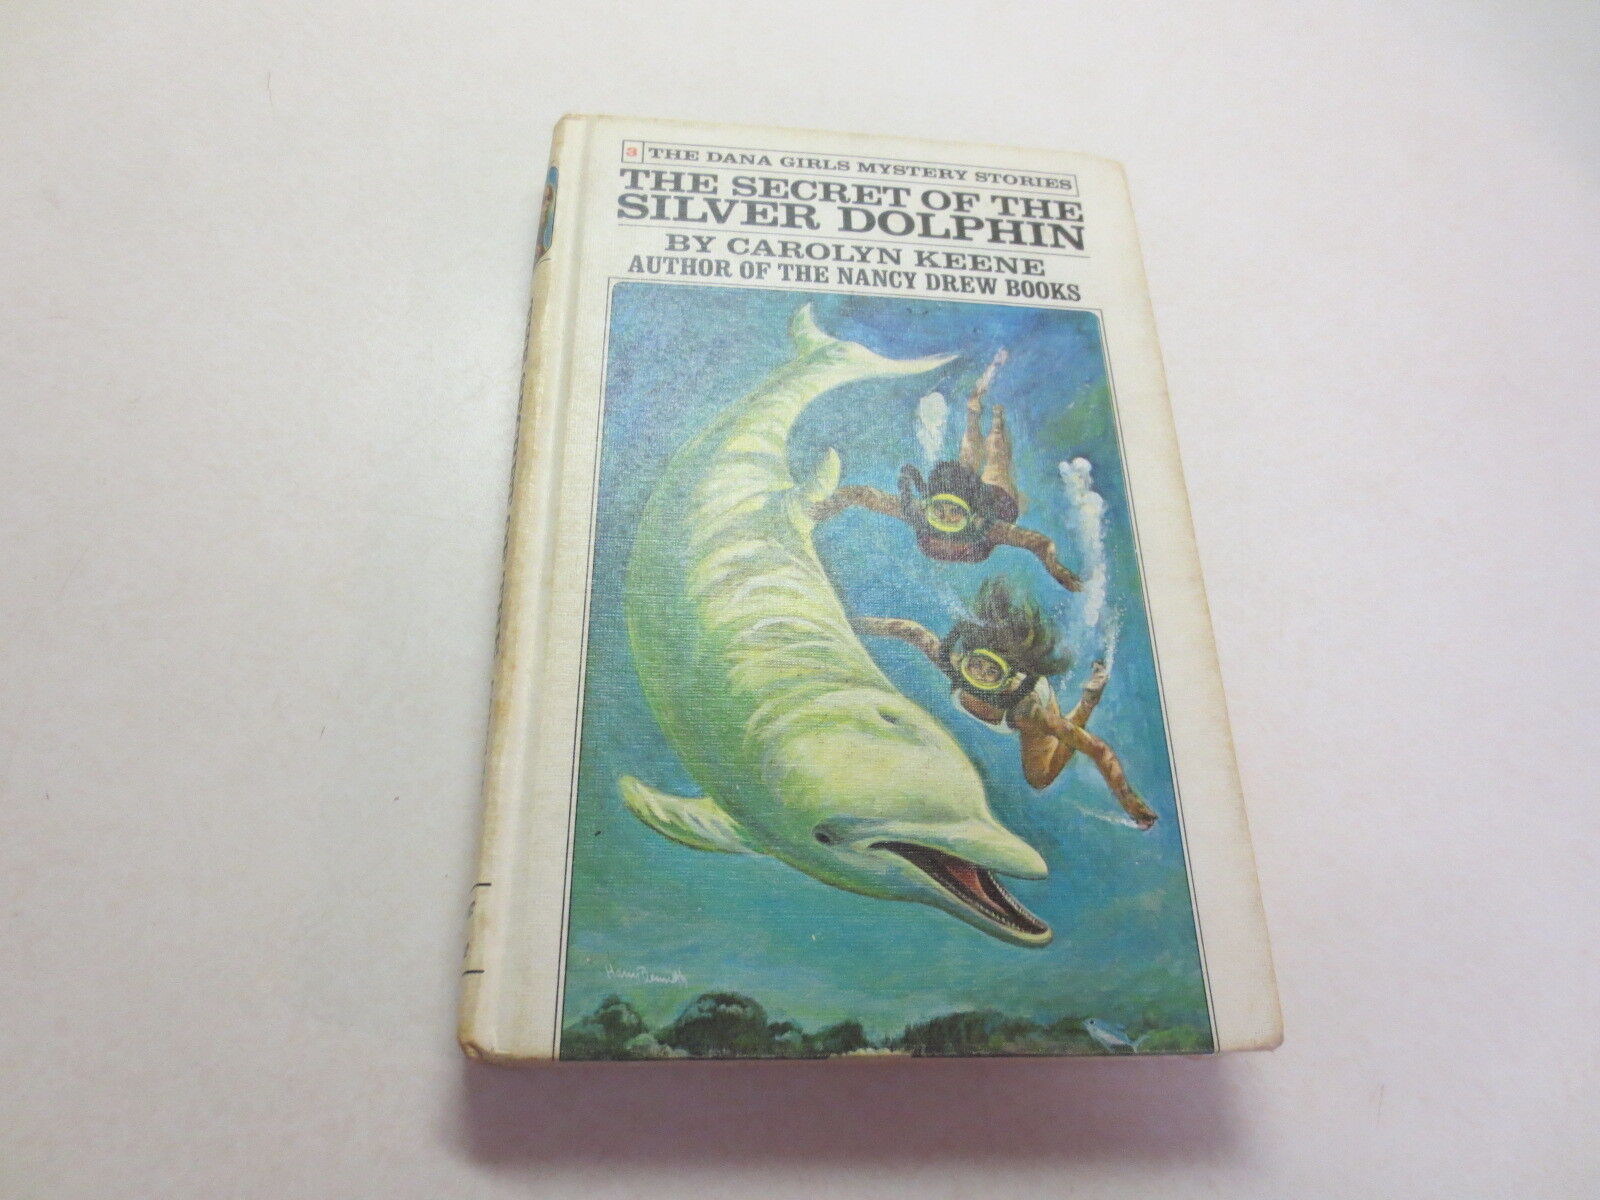 The Secret of the Silver Dolphin by Carolyn Keene The Dana Girls Mystery